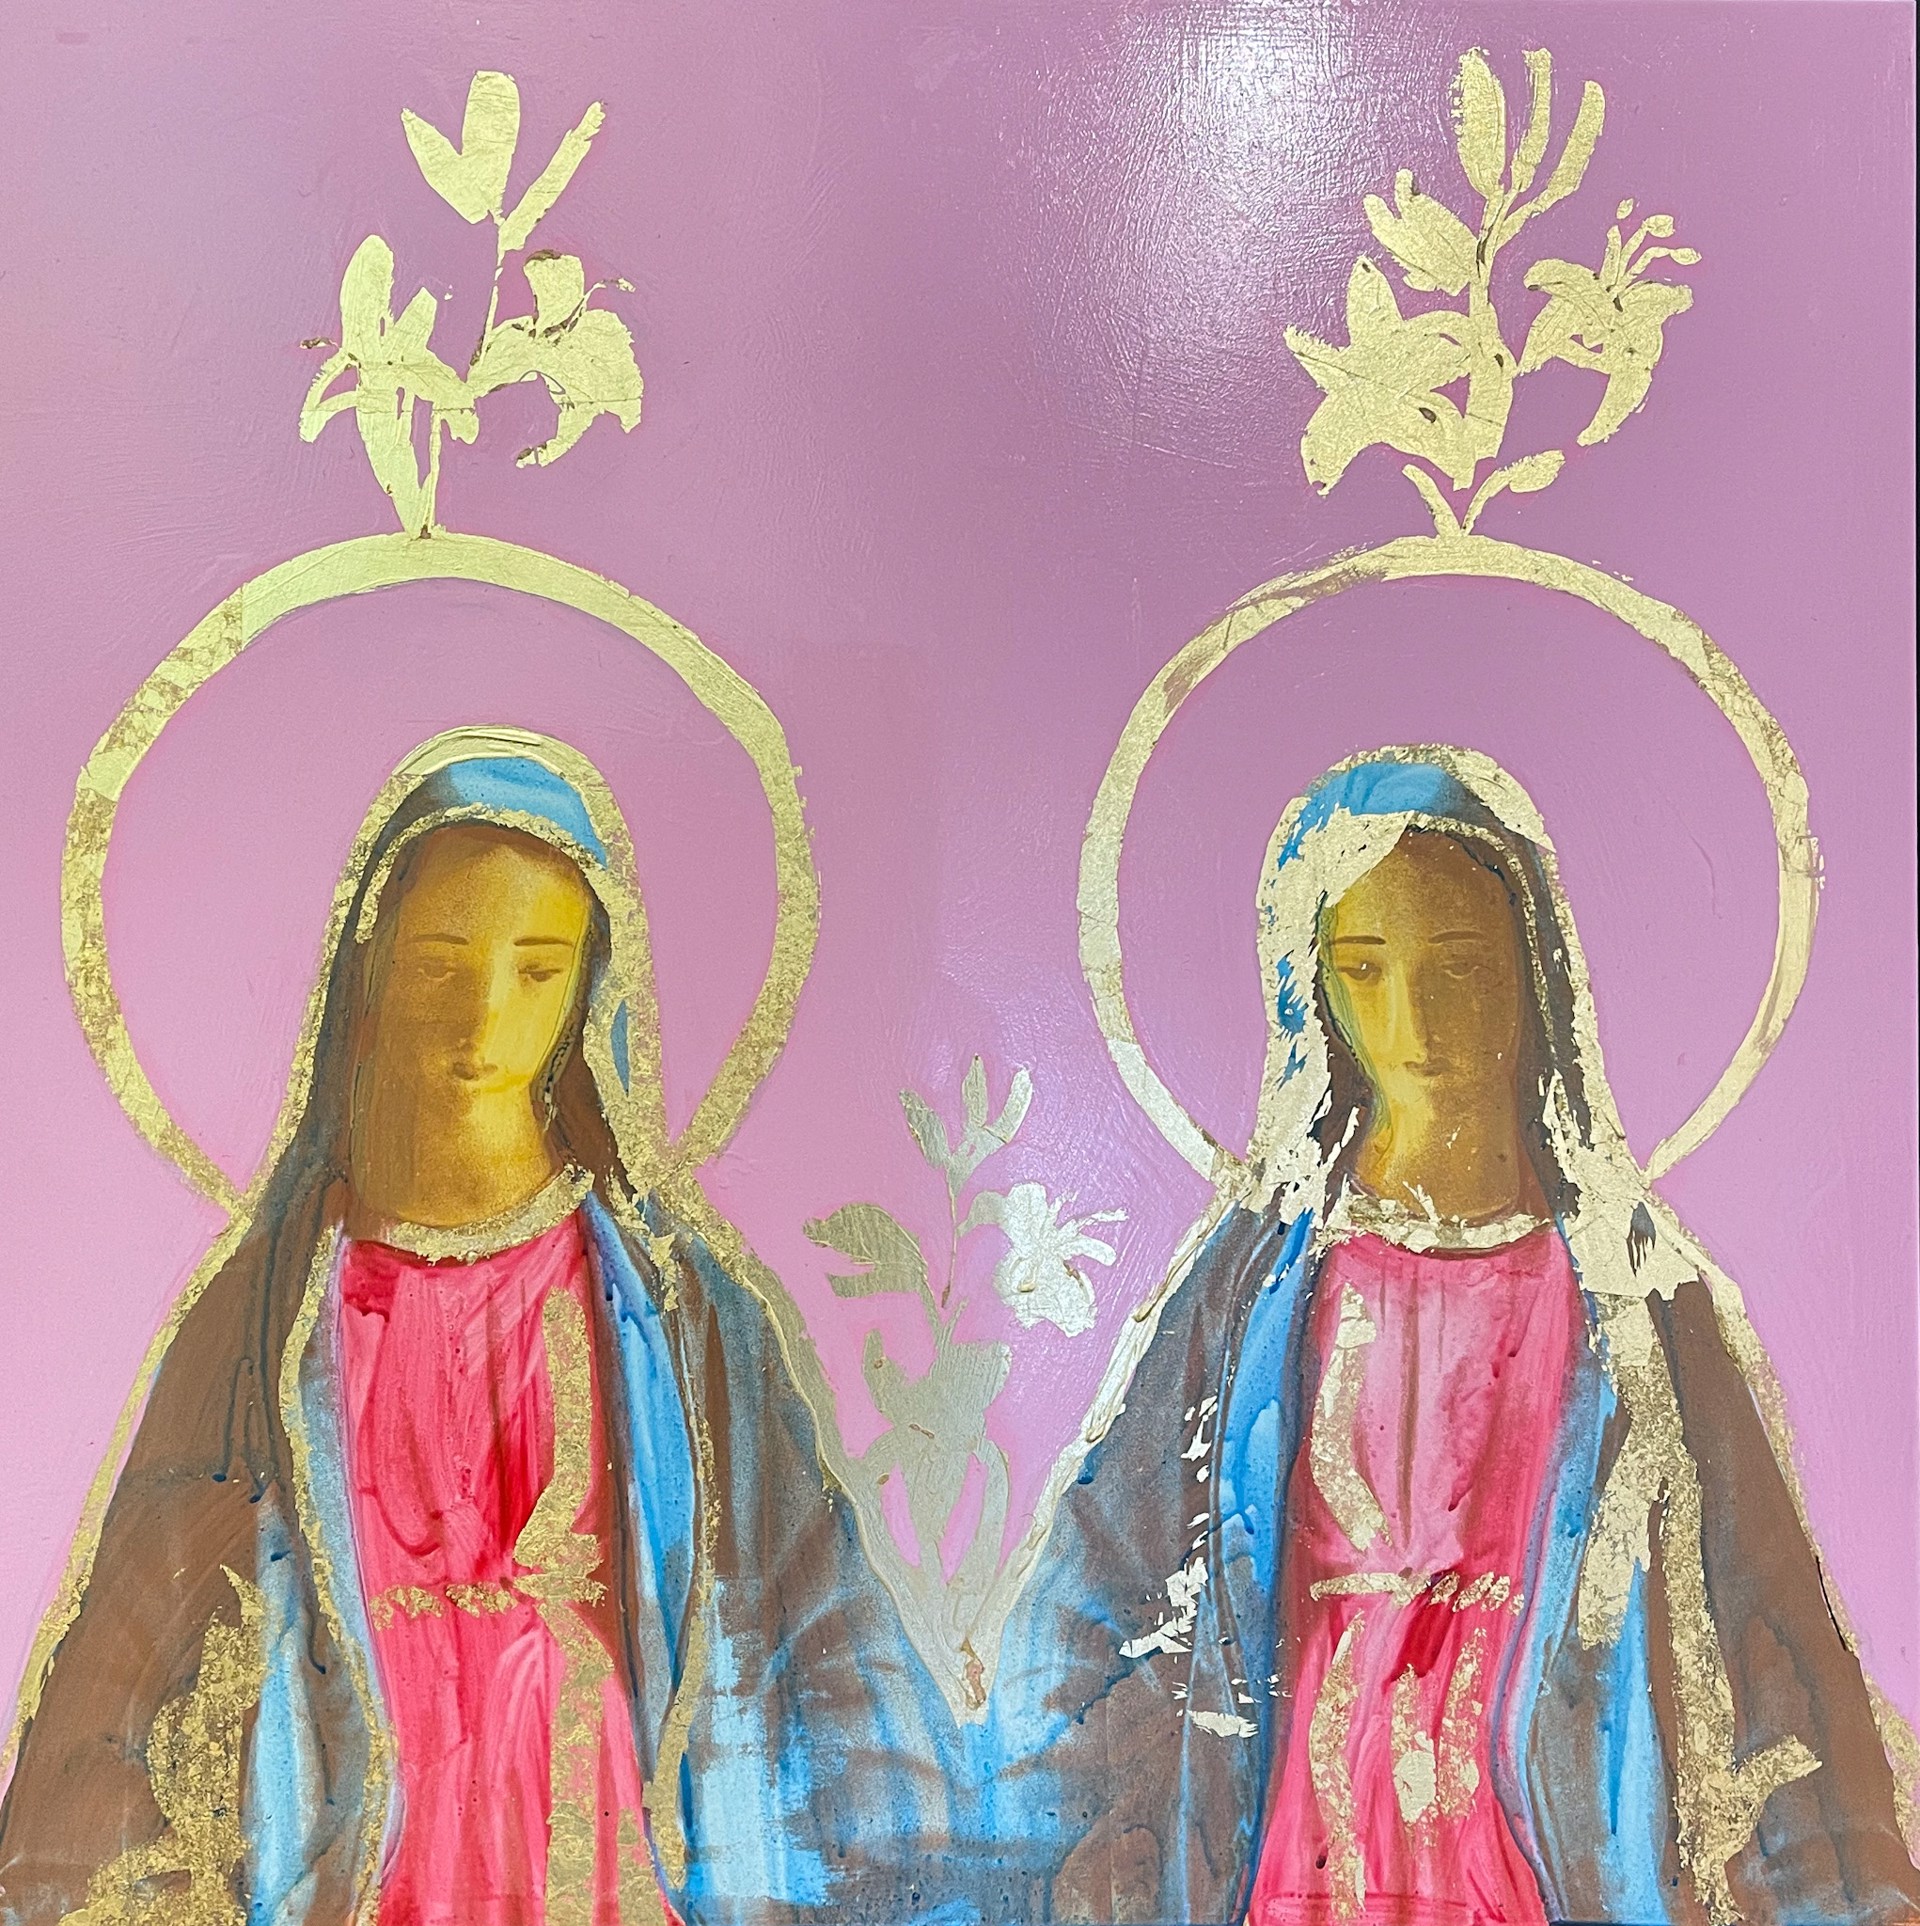 Mirrored Hail Mary in Pink and Blue by Megan Coonelly